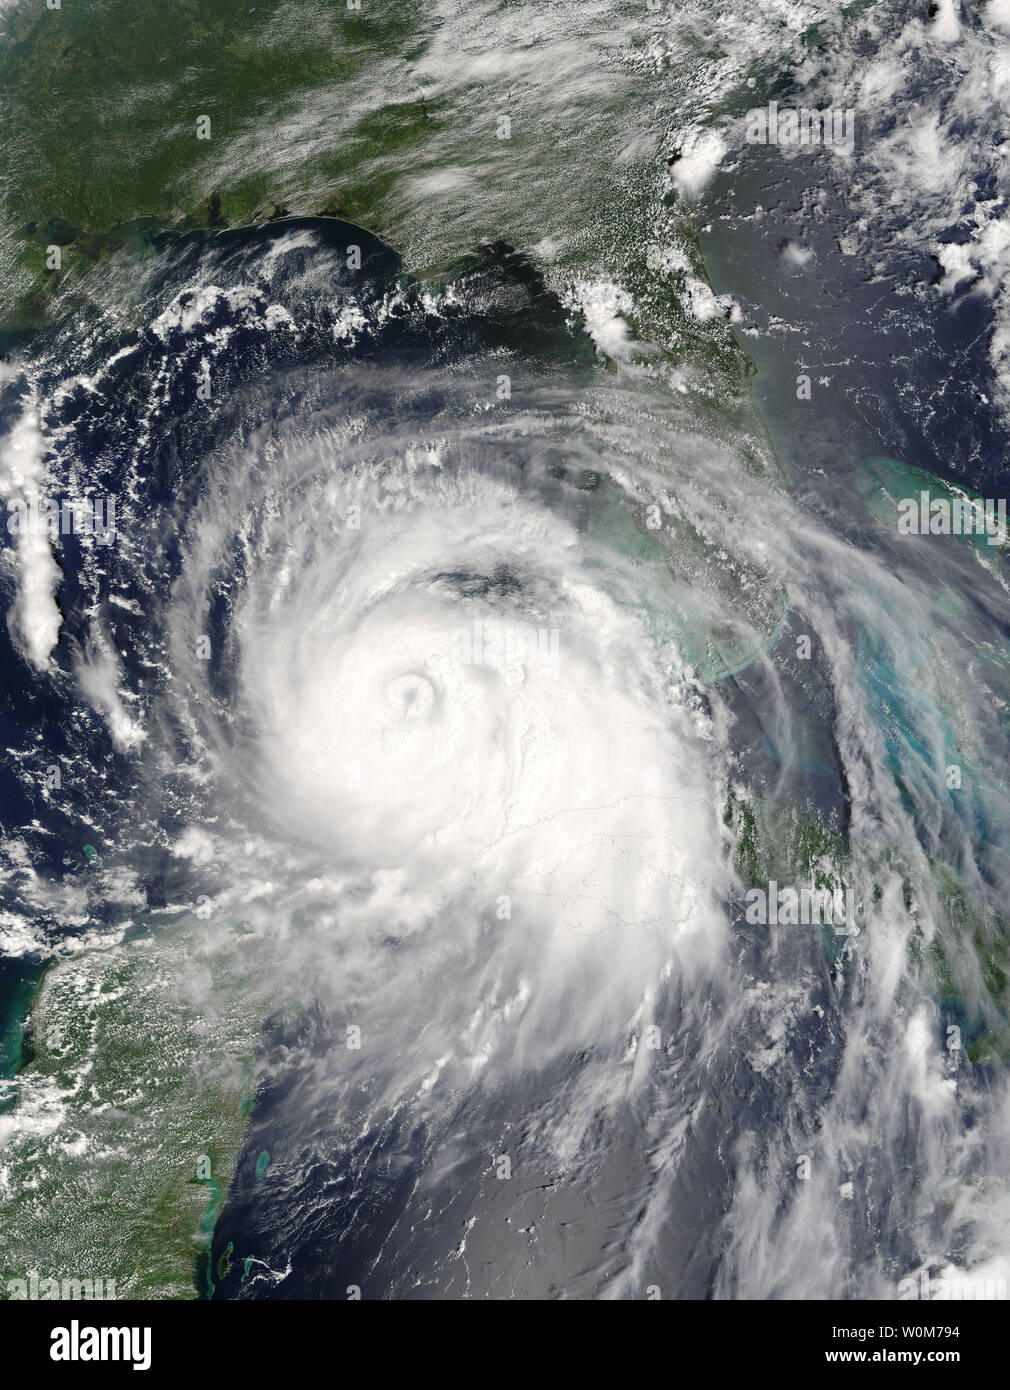 Hurricane Katrina is shown bearing down on New Orleans and the coast lines of Louisiana, Mississippi and Alabama in this NASA satellite image on Aug. 27, 2005. Katrina made landfall early on Aug. 29, and with sustained winds at 150mph and gusts of 184mph, this massive category 5 storm has already caused flooding and severe damage.   (UPI Photo/NOAA ho) Stock Photo